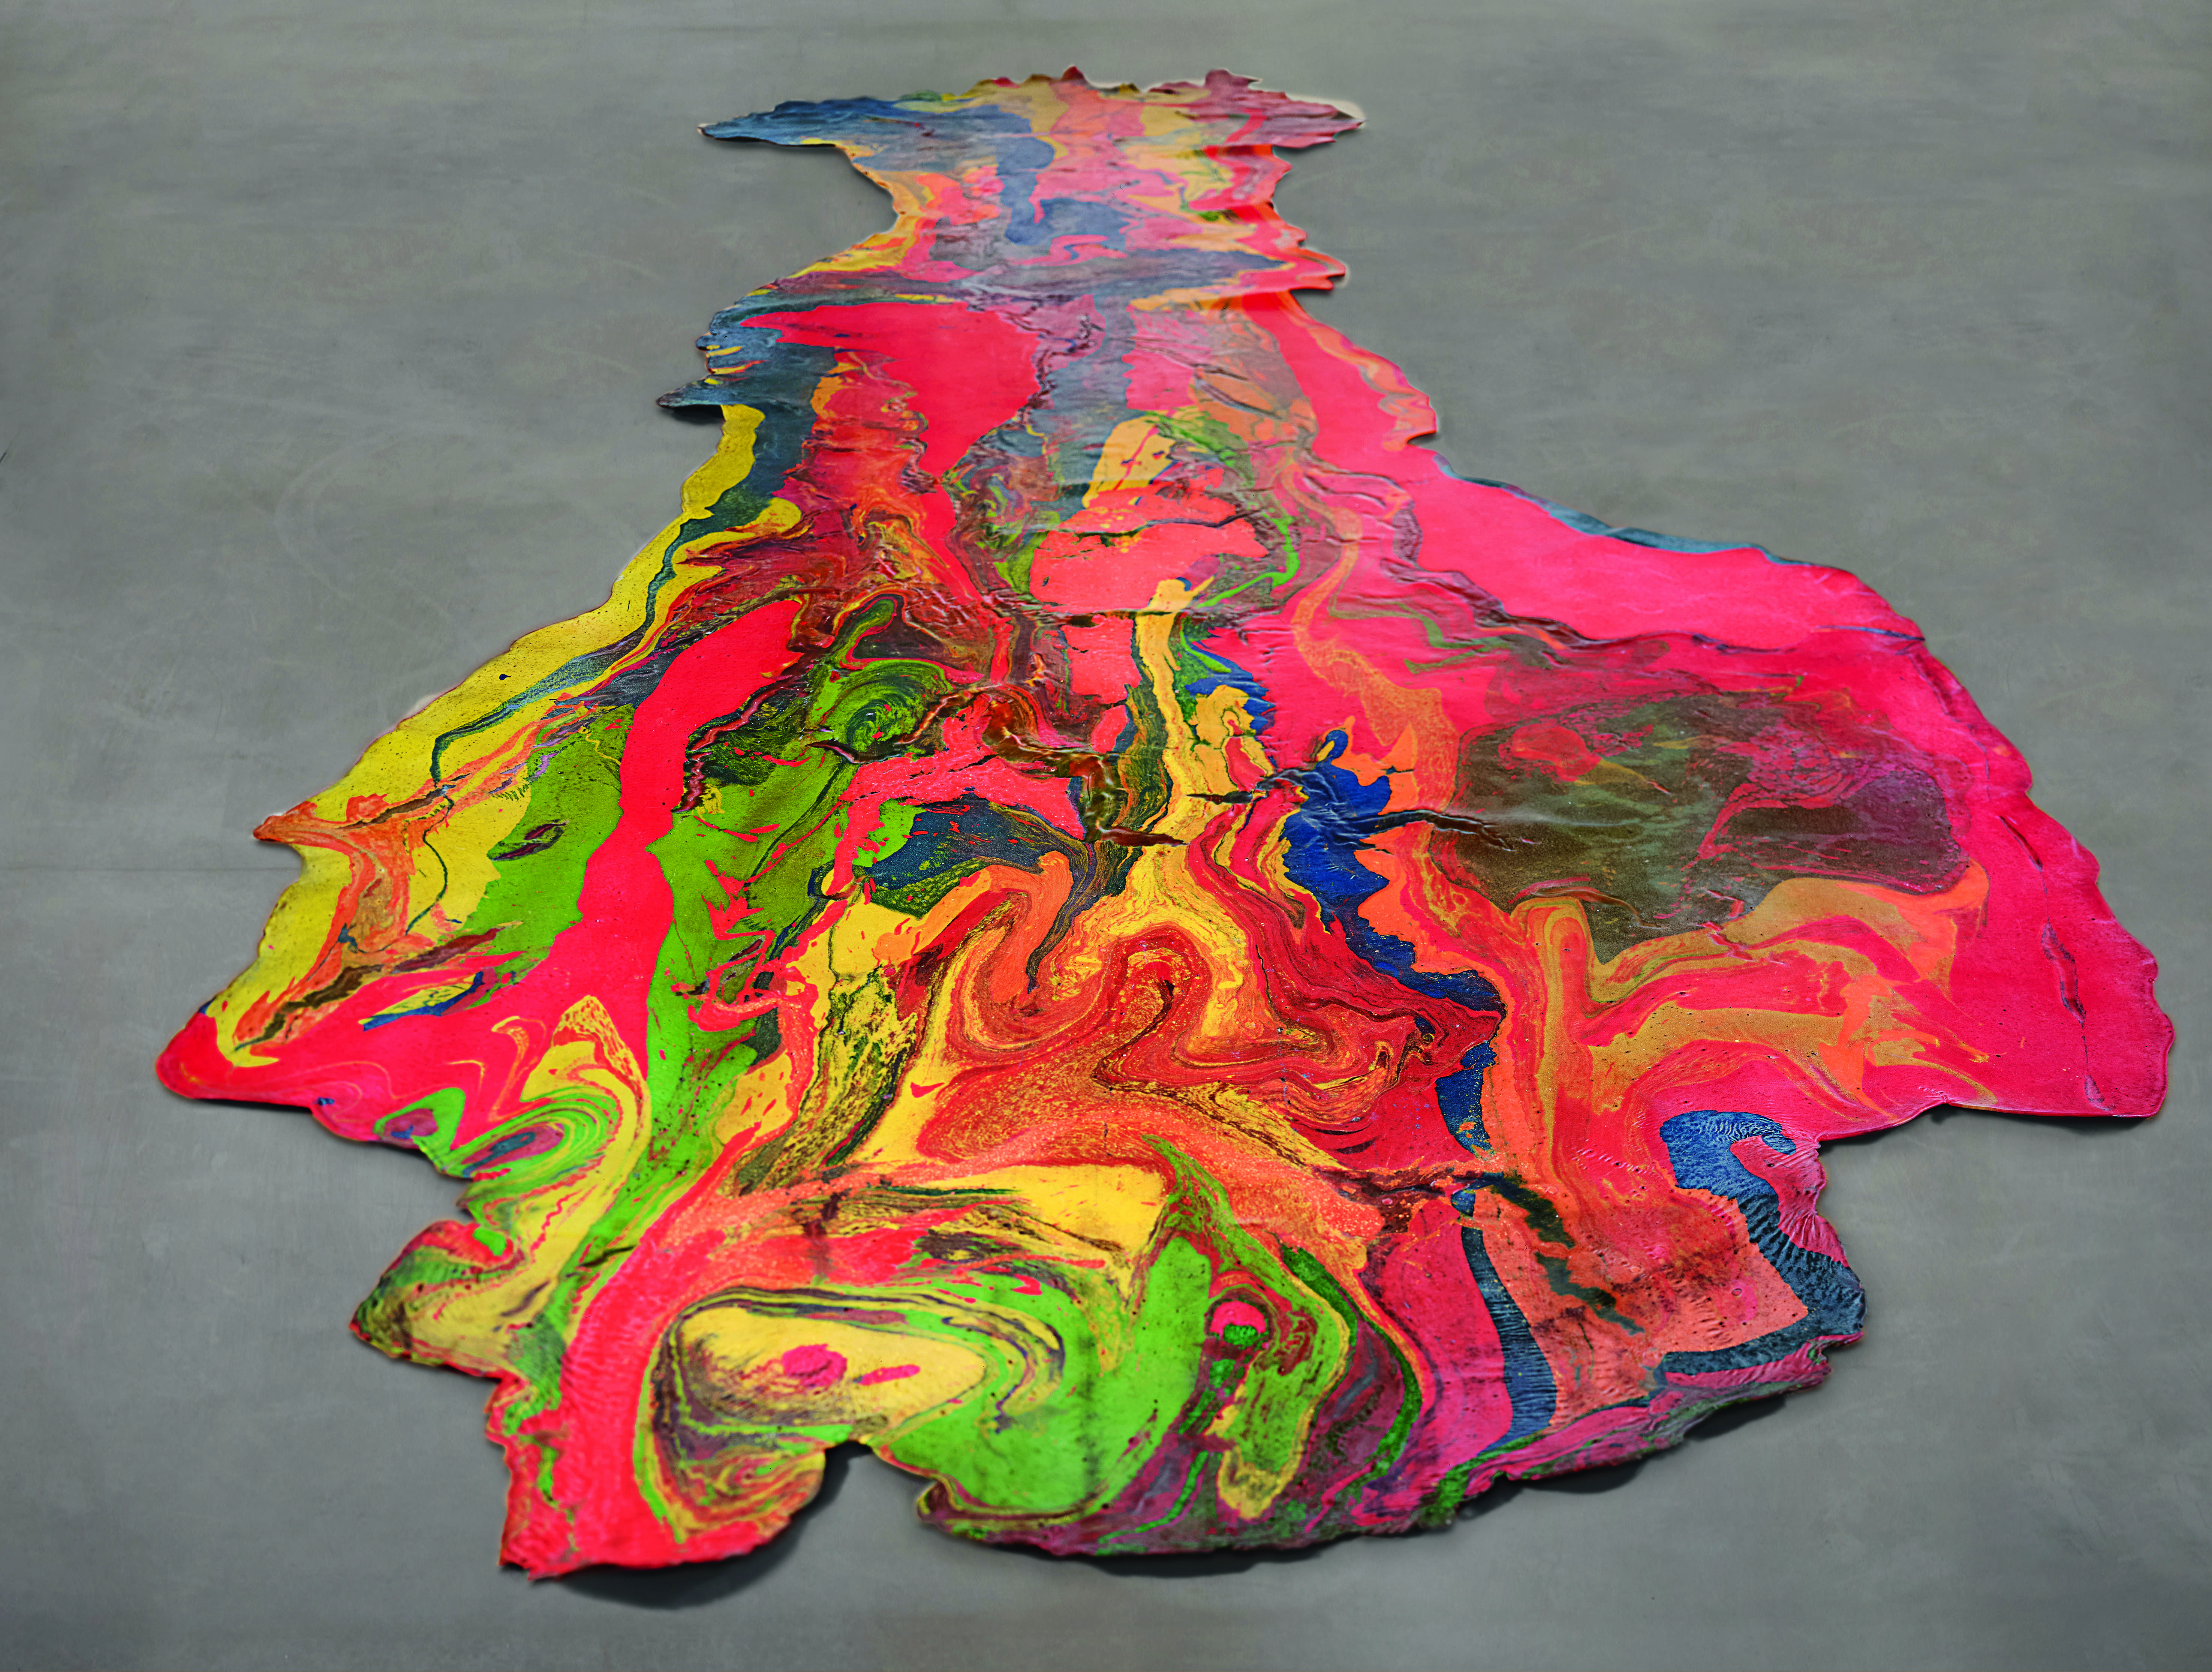 The way abstract expressionism shaped Lynda Benglis